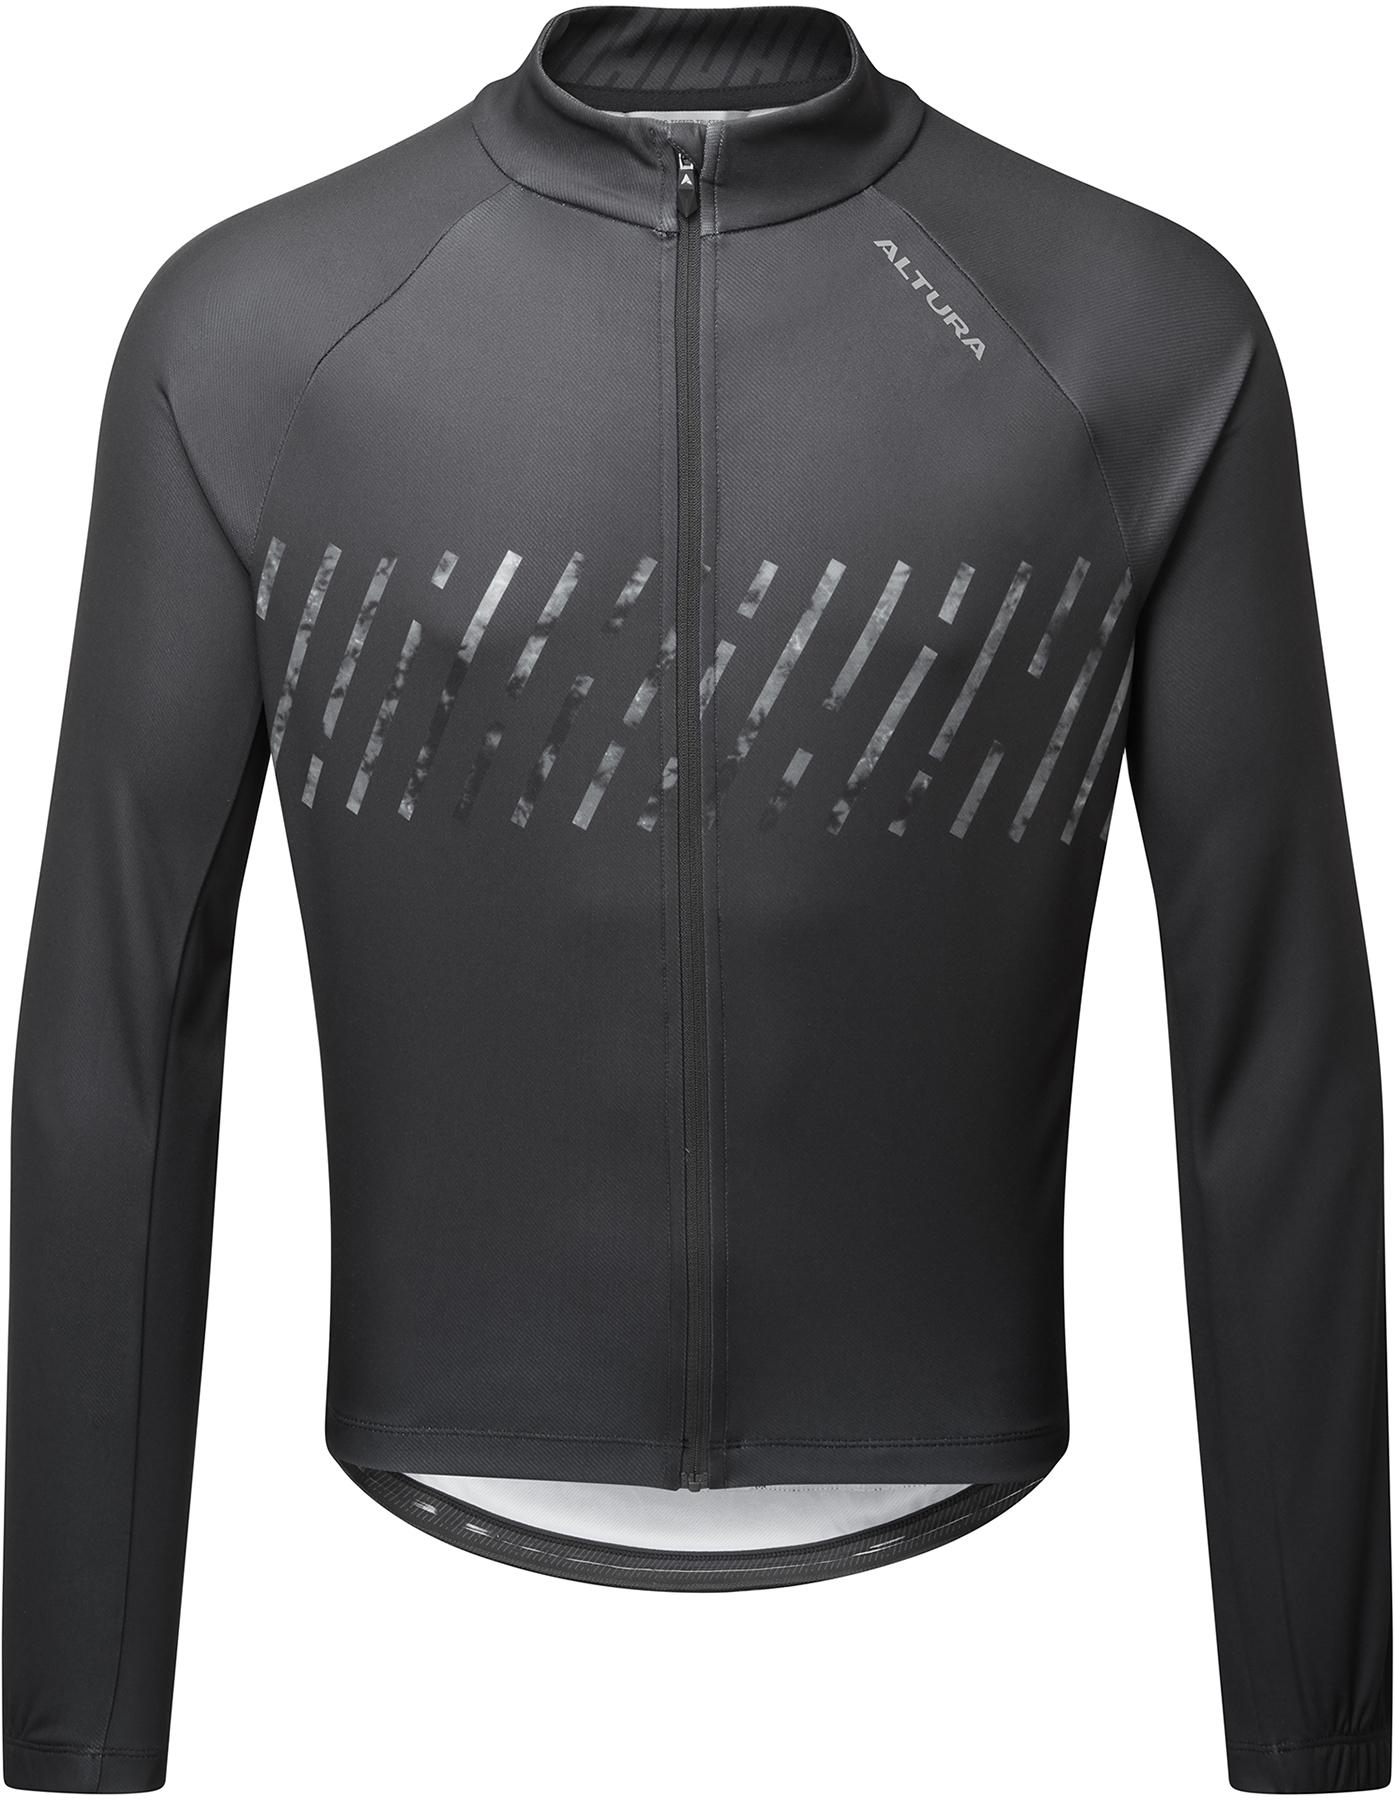 Image of Altura Airstream Long Sleeve Jersey - Black